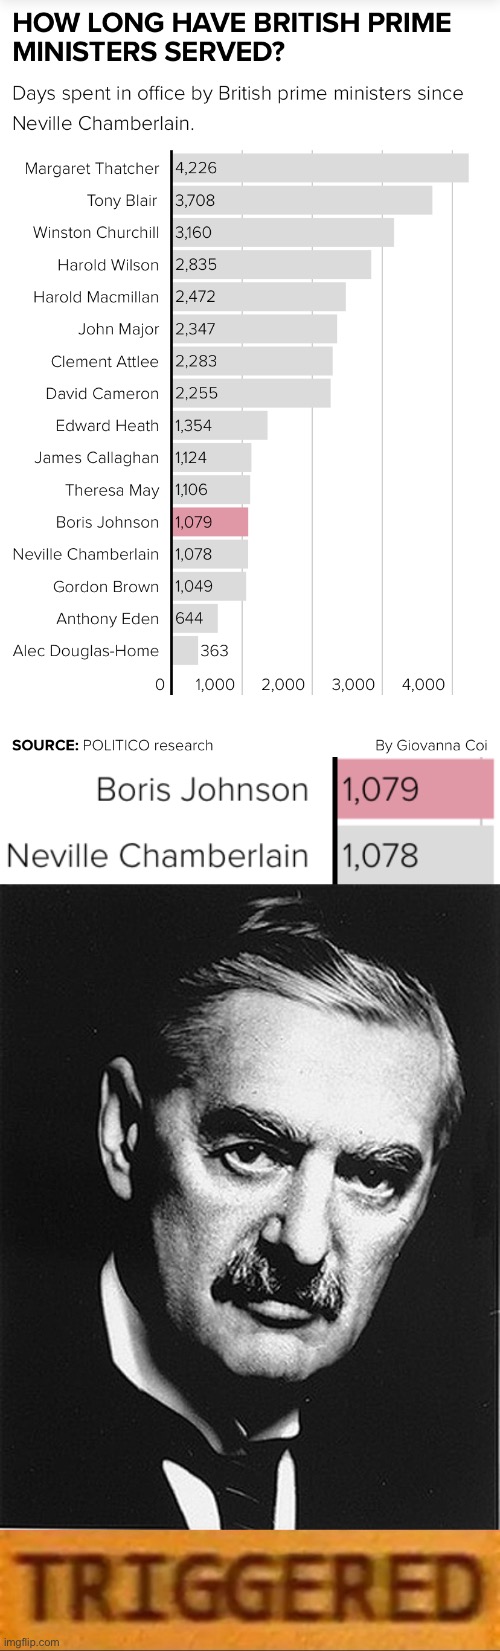 Theory: Boris Johnson clung to power one extra day just to surpass Neville Chamberlain | image tagged in arthur neville go ahead take it camberlain,history,historical meme,anglophobia,weird fan theories that actually make sense,bruh | made w/ Imgflip meme maker